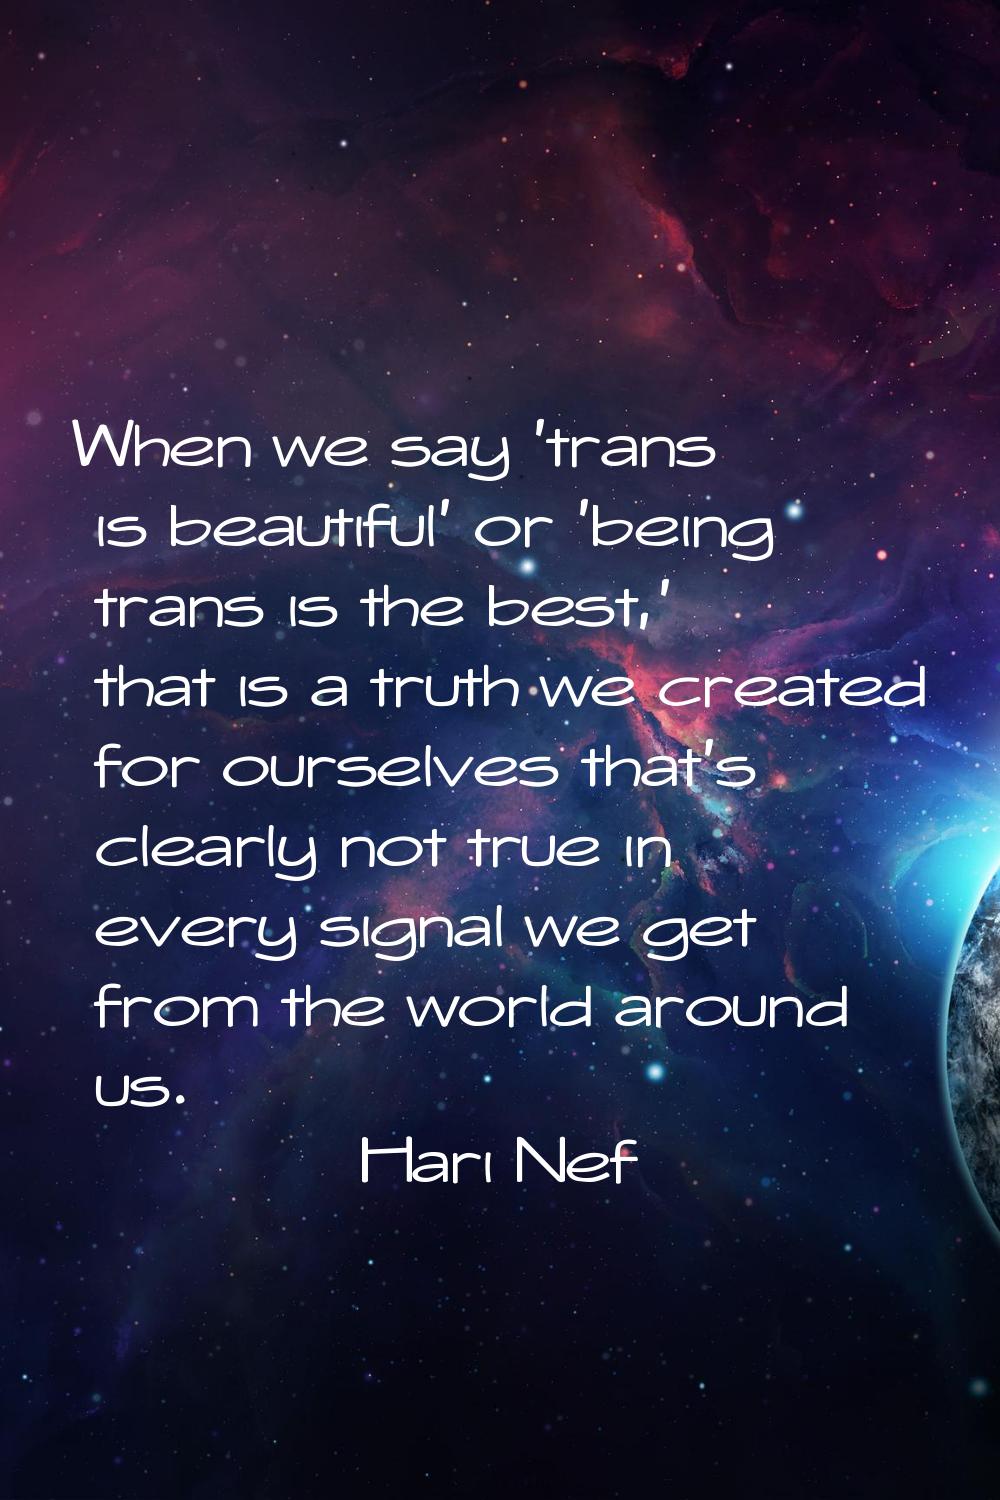 When we say 'trans is beautiful' or 'being trans is the best,' that is a truth we created for ourse